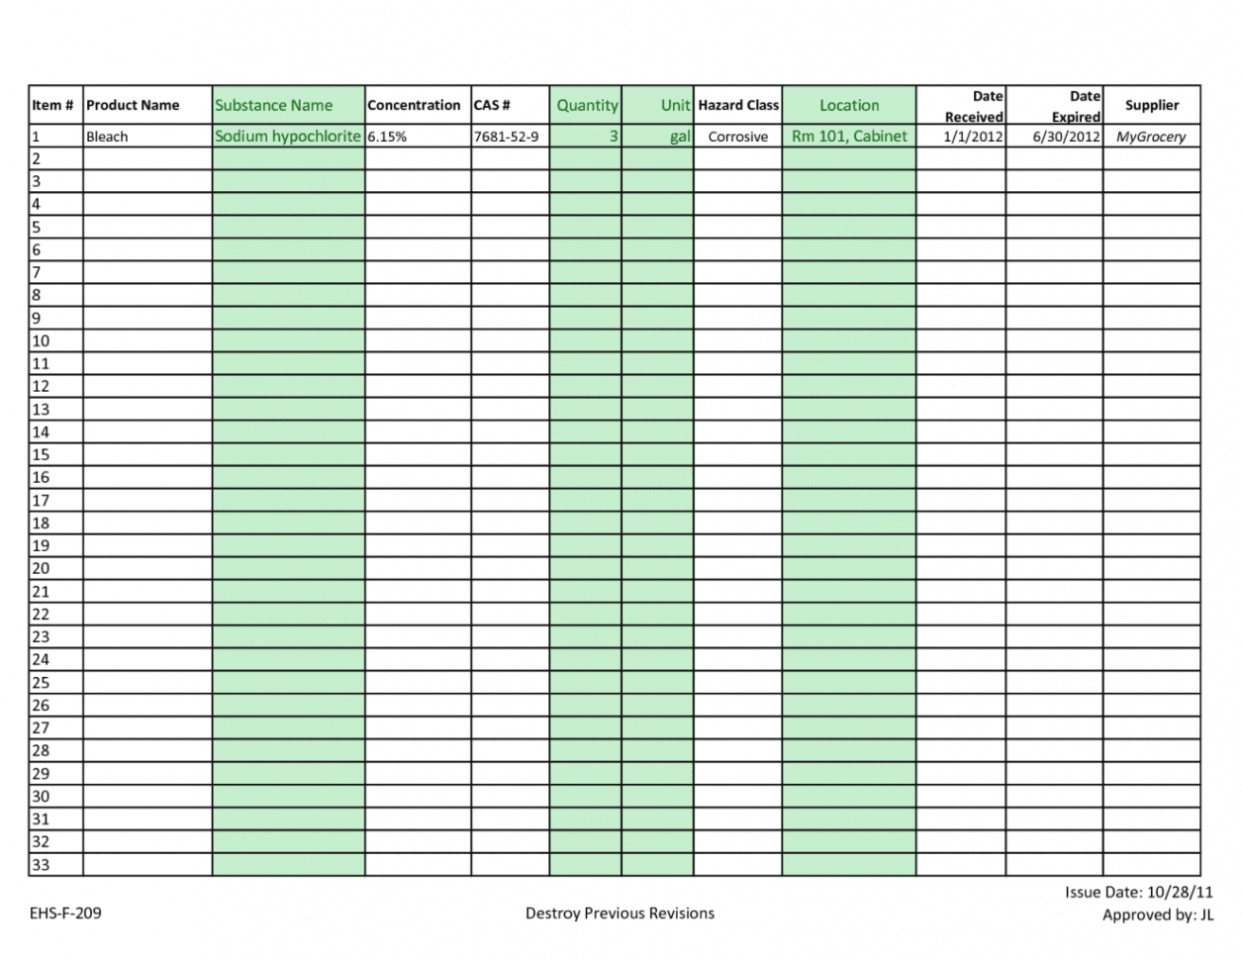 Inventory Spreadsheet Template Free Spreadsheet Templates For Business Inventory Spreadsheet Within Small Business Inventory Spreadsheet Template